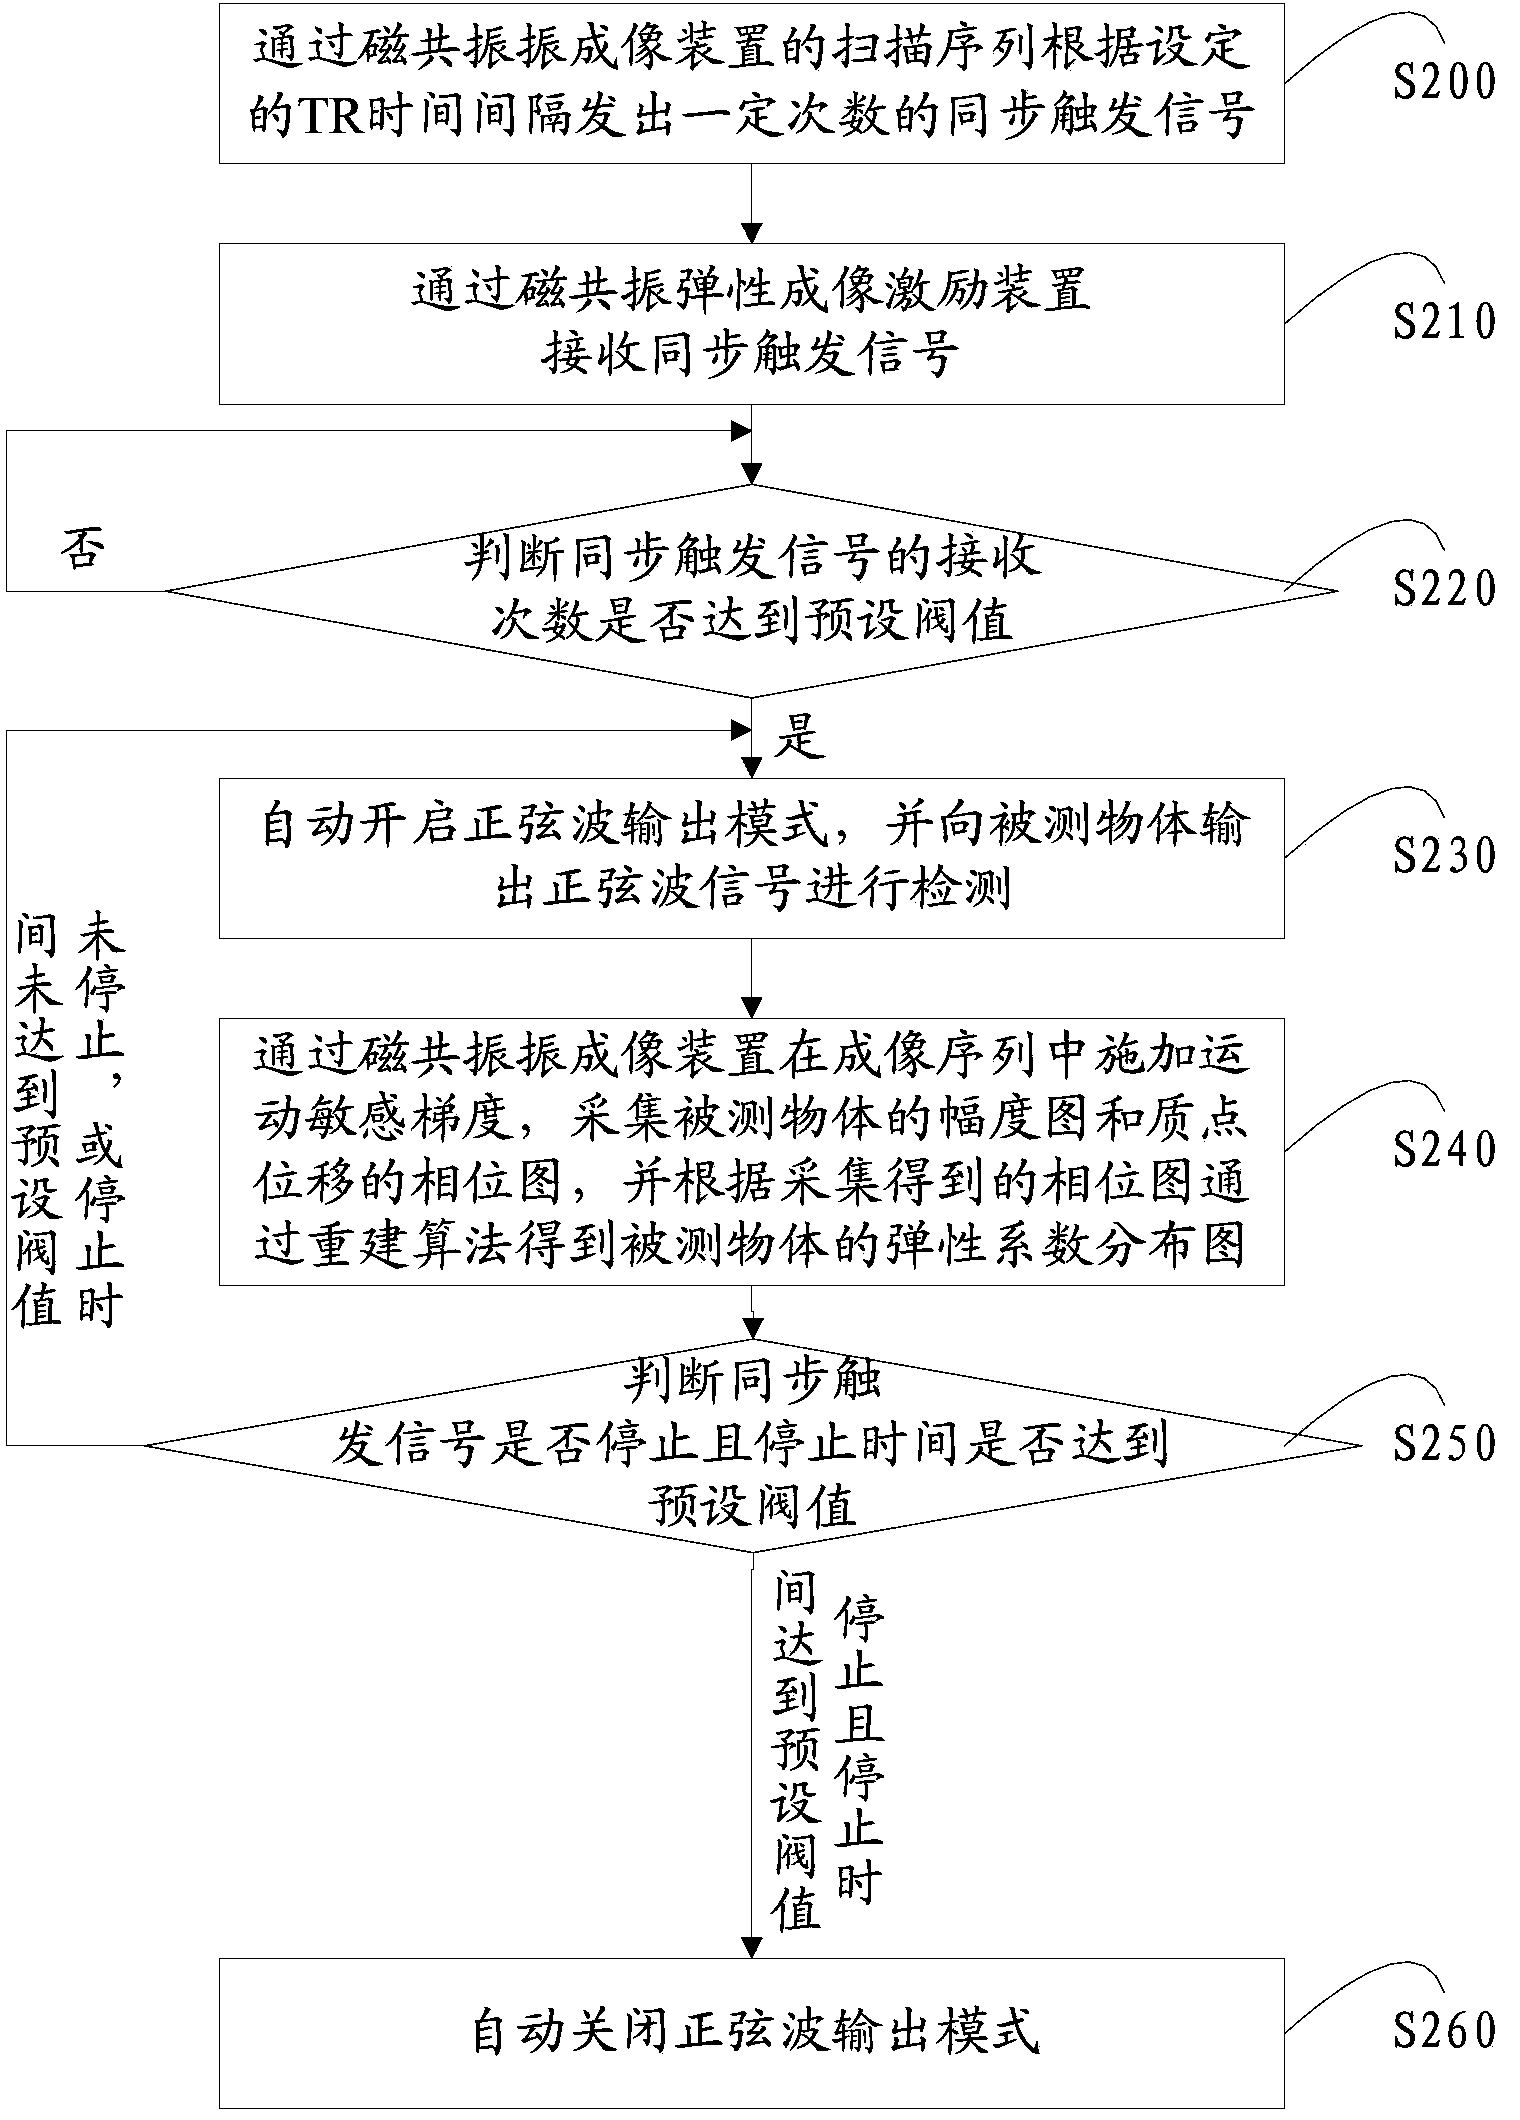 Medical image configuration system and method